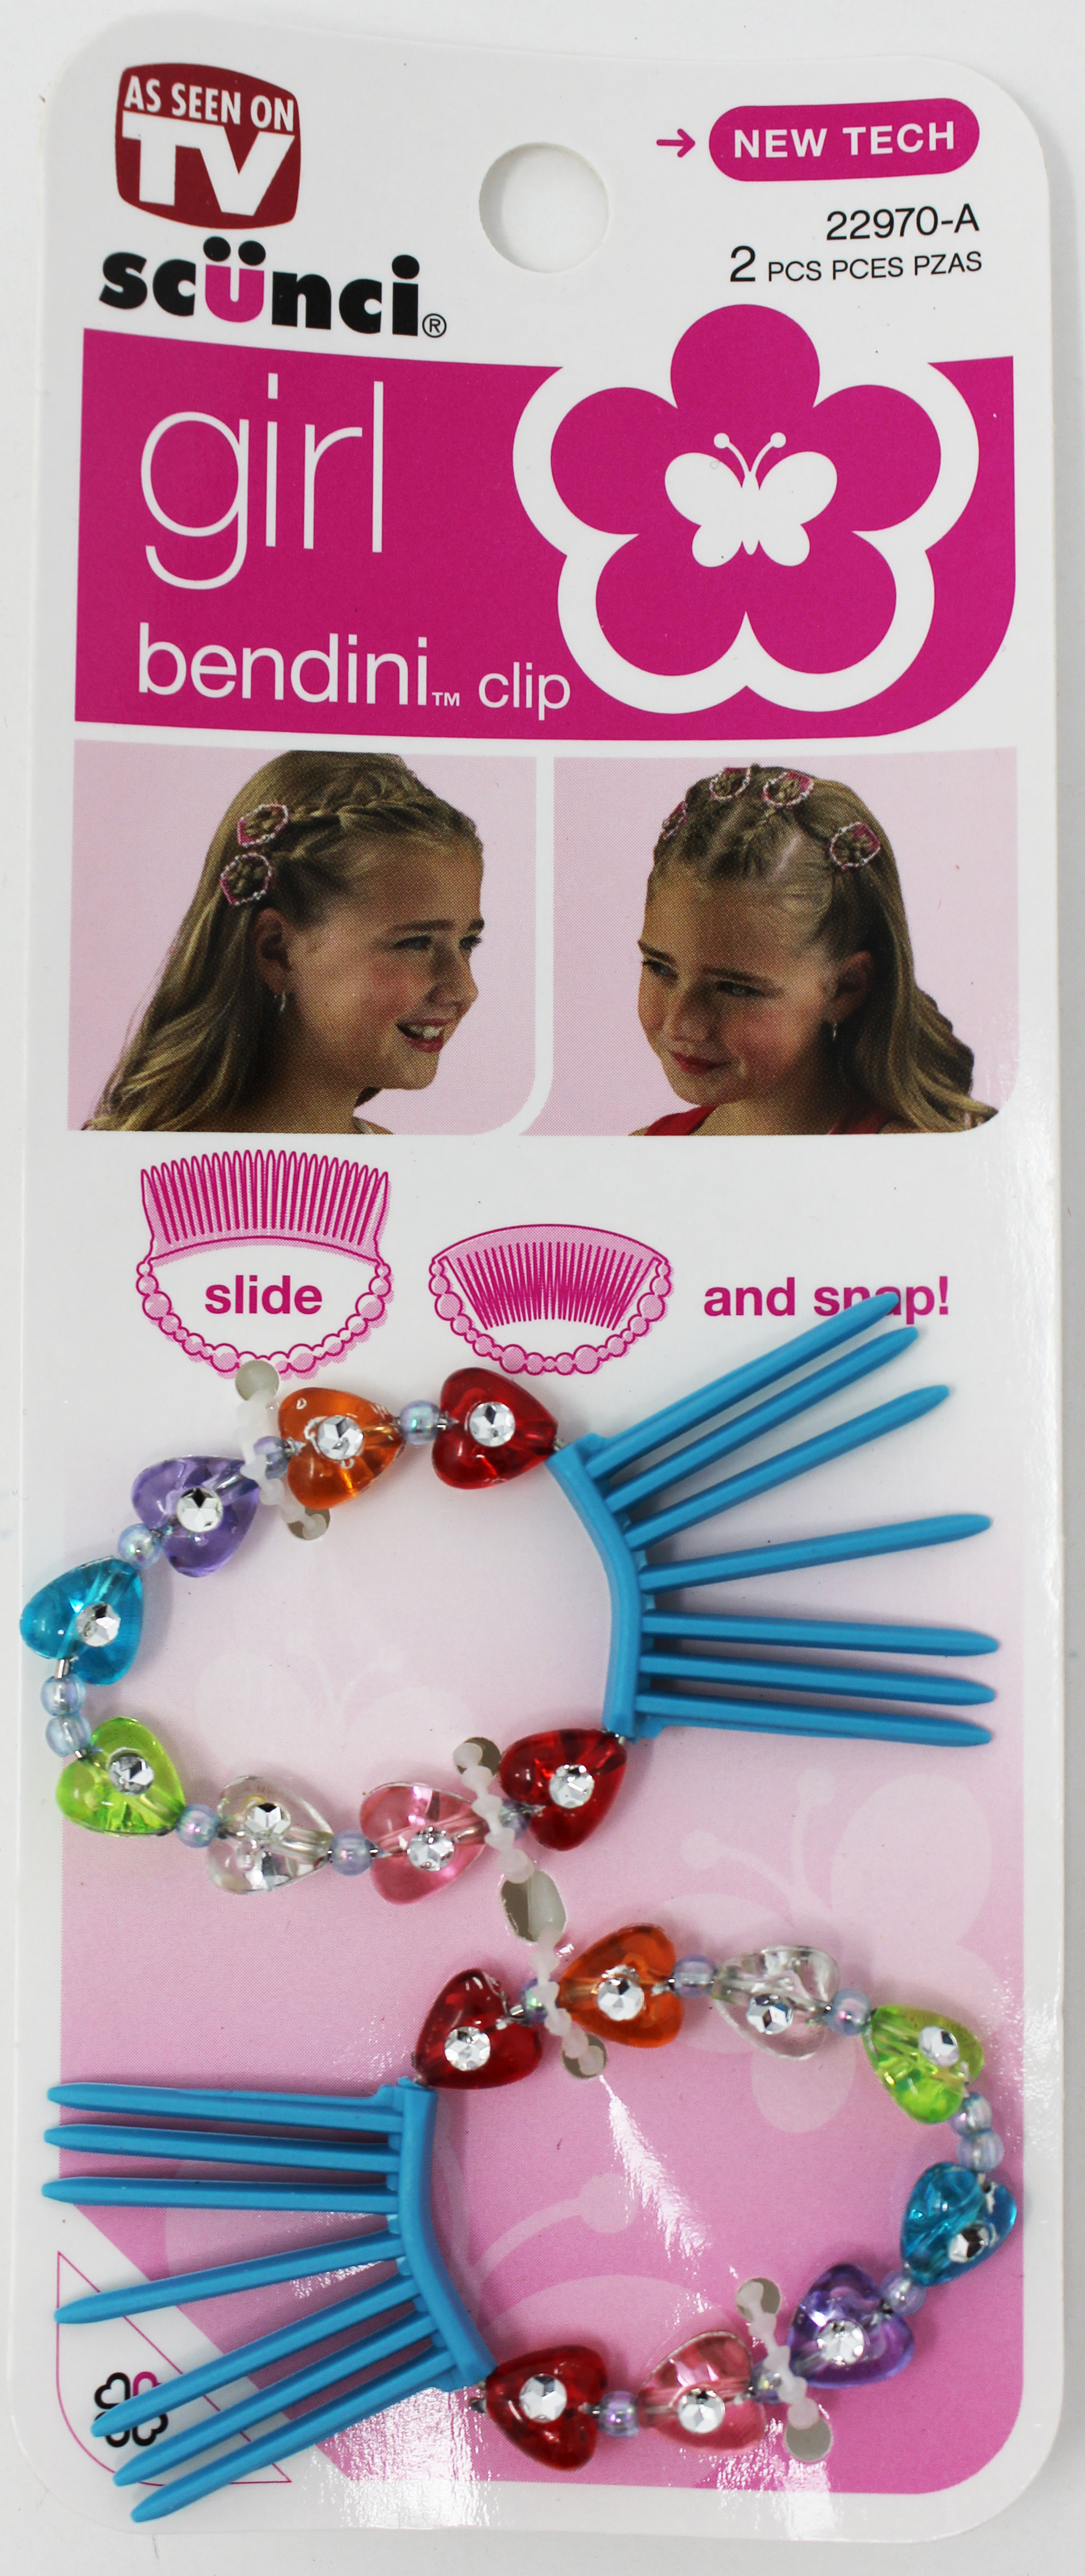 AS SEEN ON TV SLIDE SNAP CLIPS 2PCS